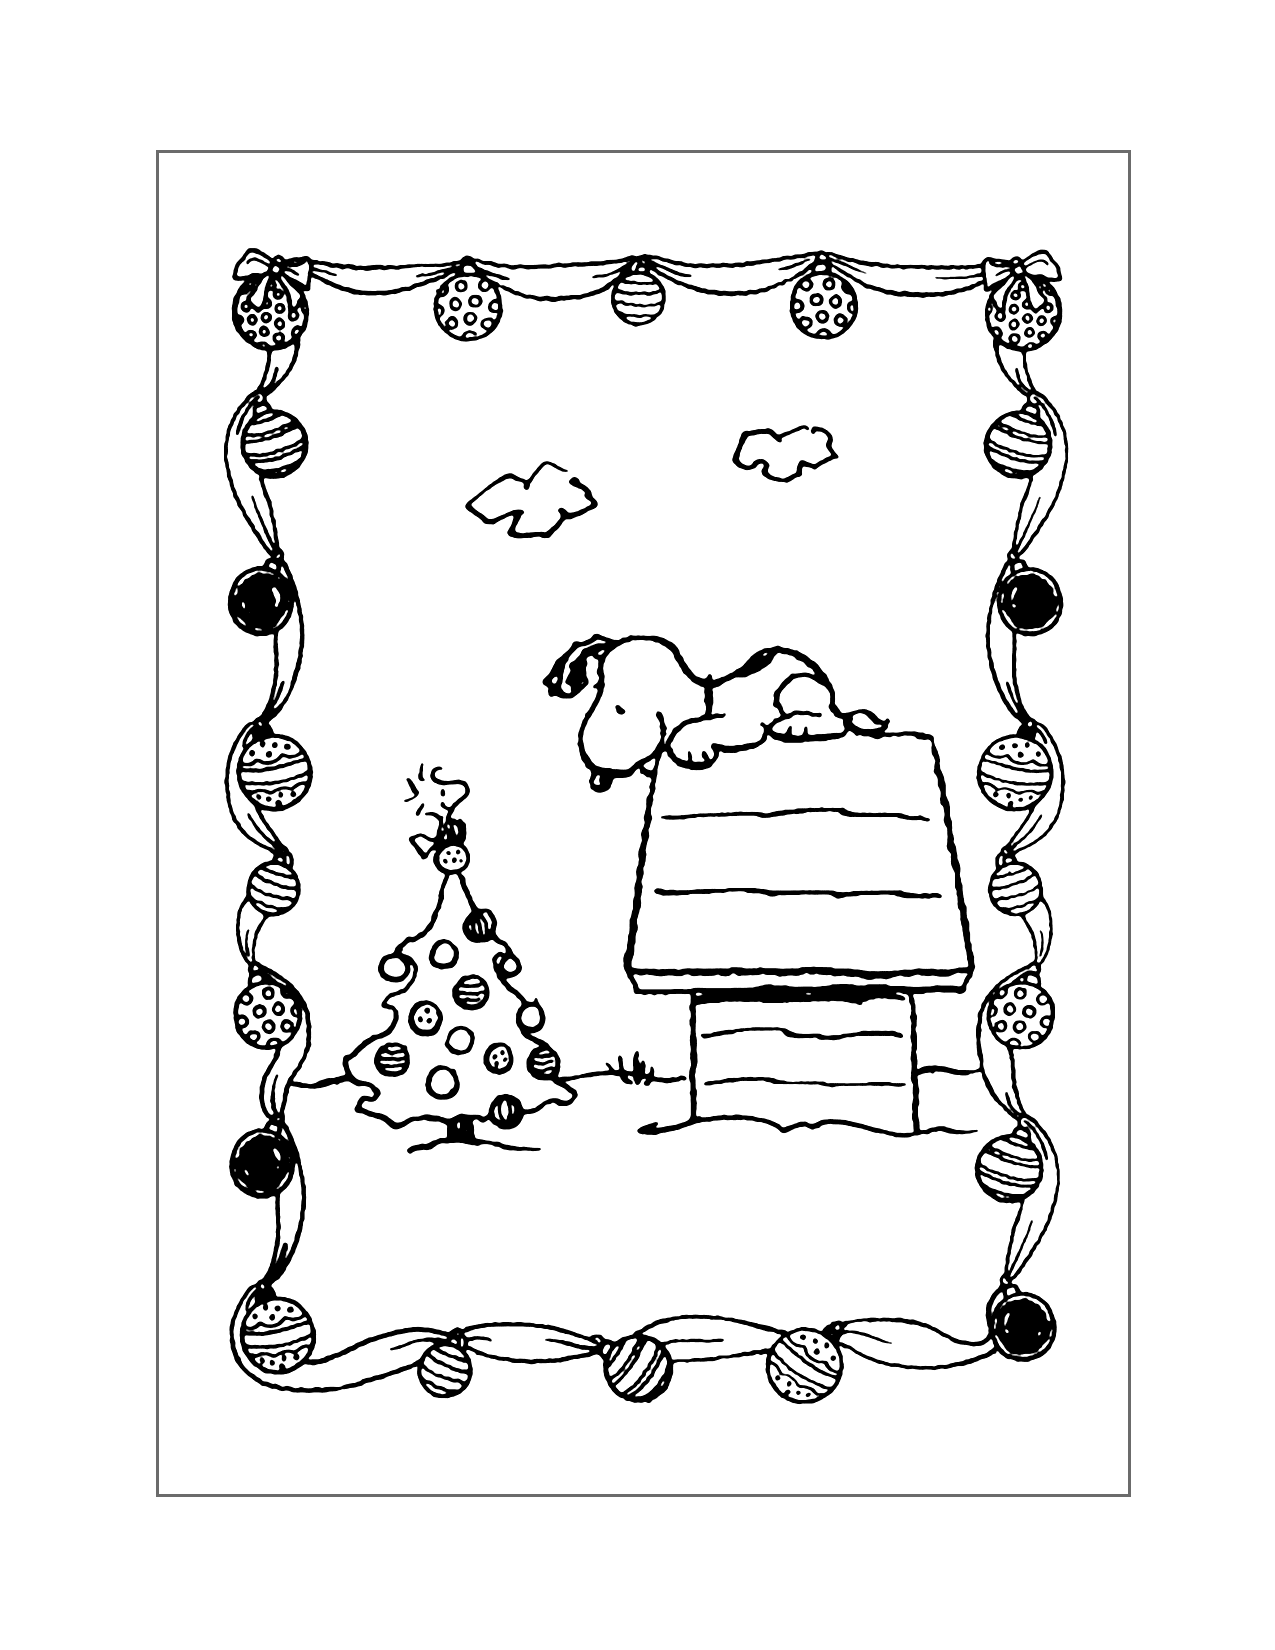 Snoopys Christmas Tree Coloring Page